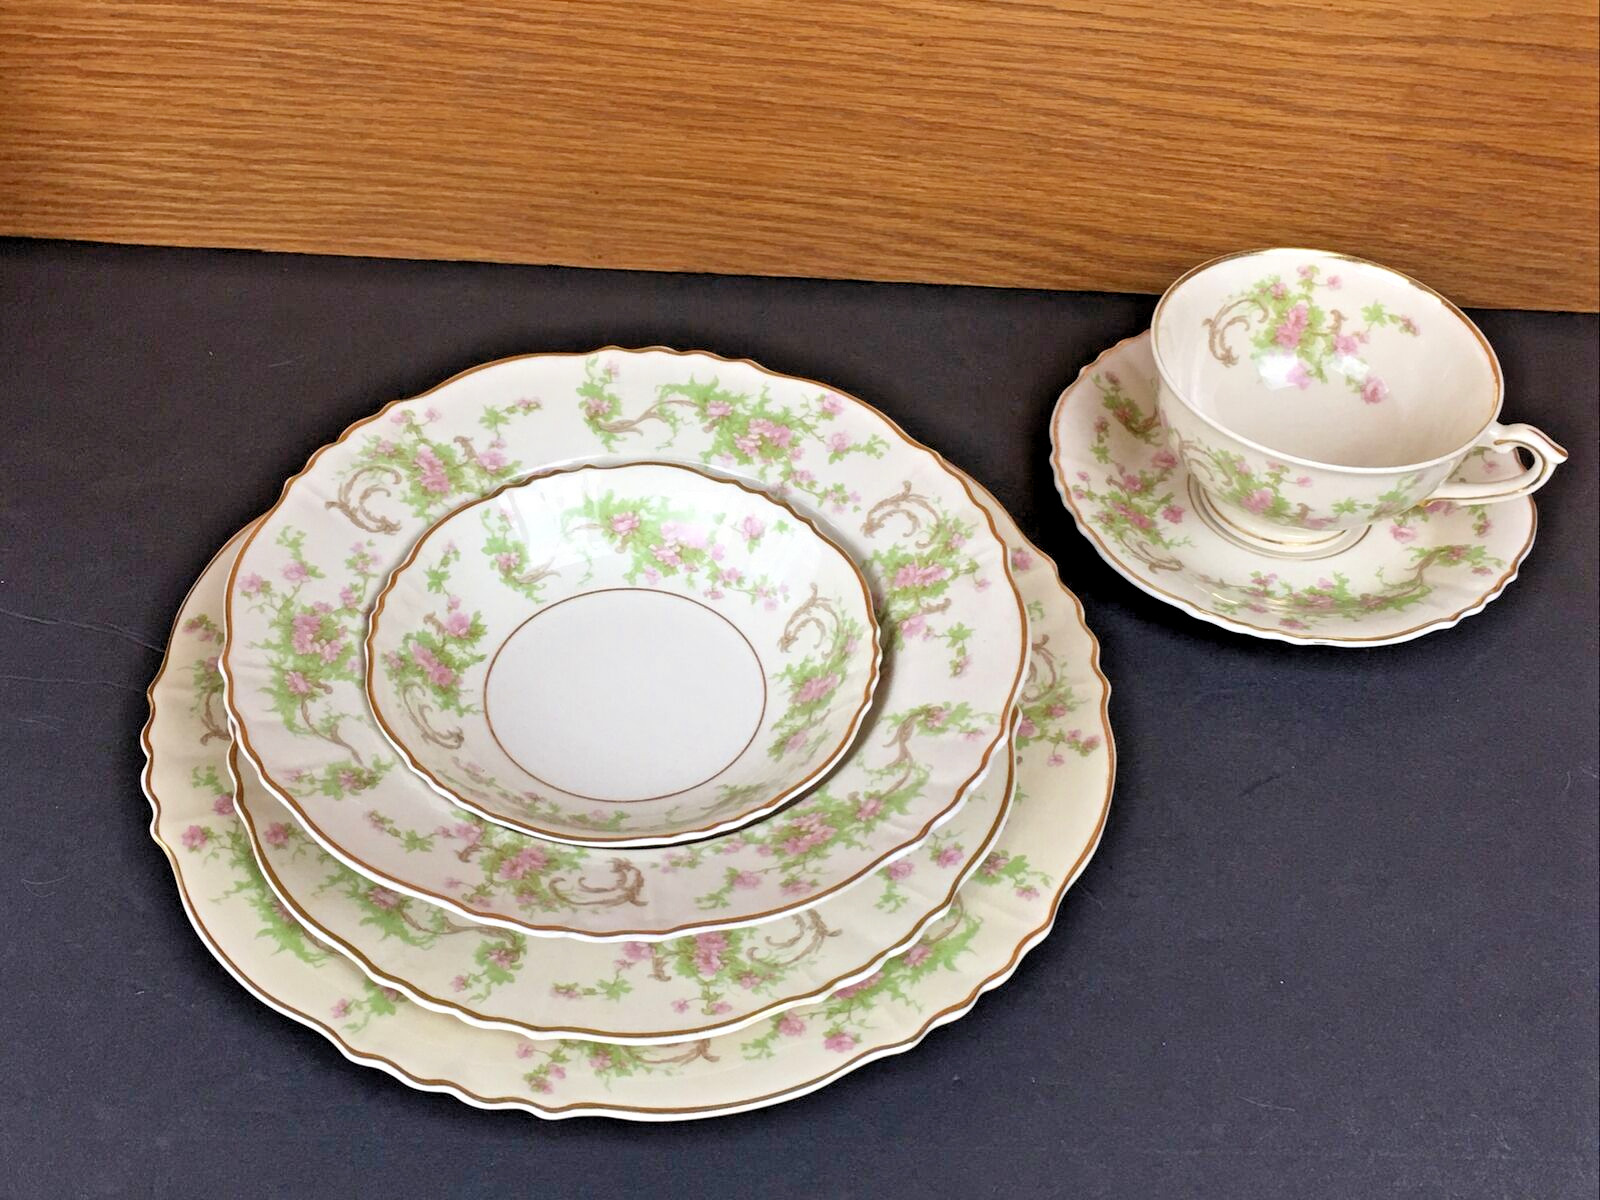 6 Piece Vintage Federal Shape Syracuse China Dearborn Table Setting Plates Bowls